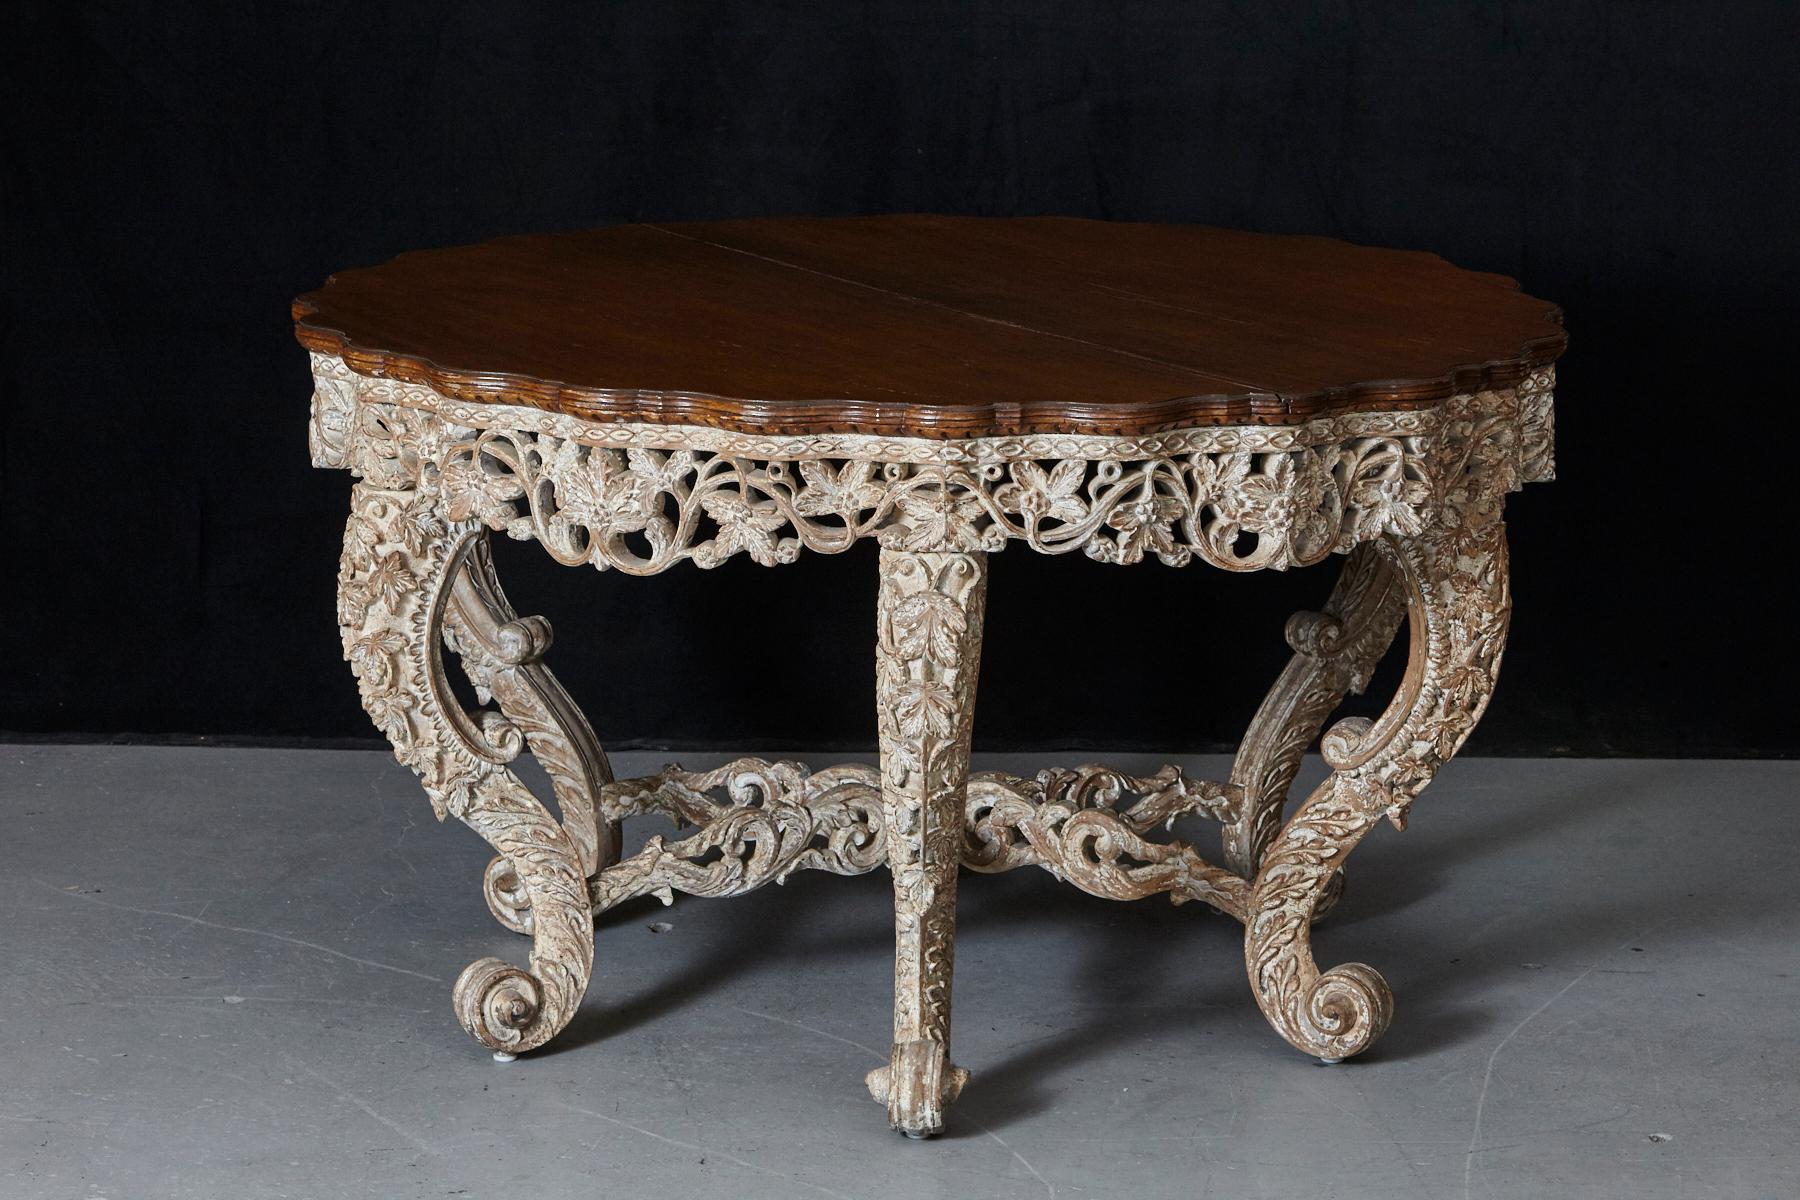 A stunning Anglo-Indian centre table with six legs, beautifully carved in elaborate fashion. Carved and pierced apron with foliate designs, six cabriole legs with rich floral carvings and terminate in left scrolls on a peg foot joined by carved and